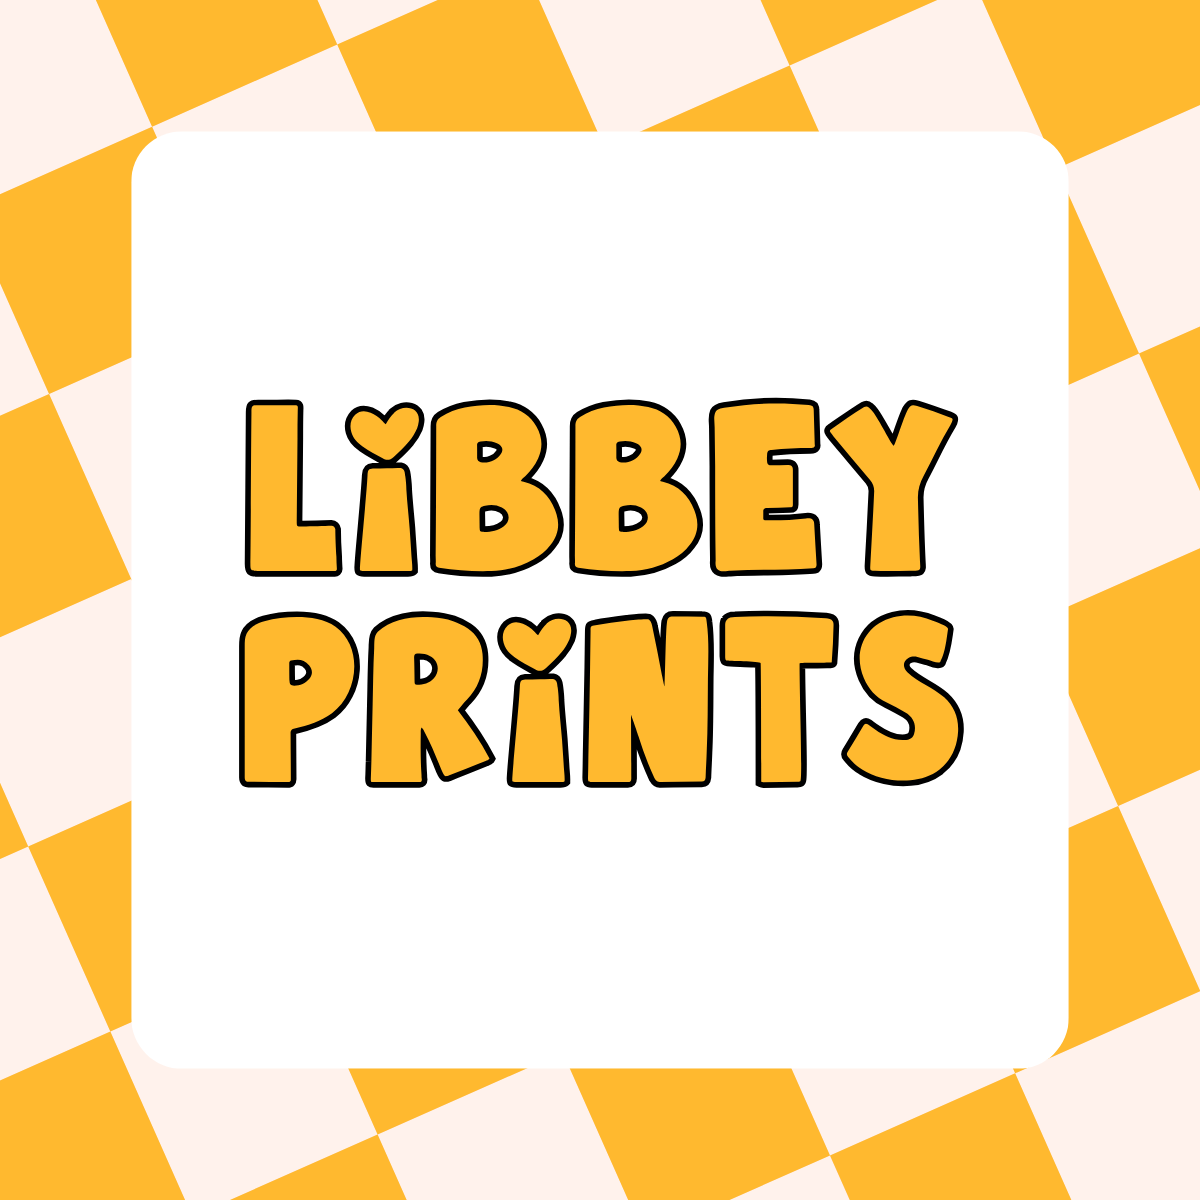 Libbey/Glass Can Prints